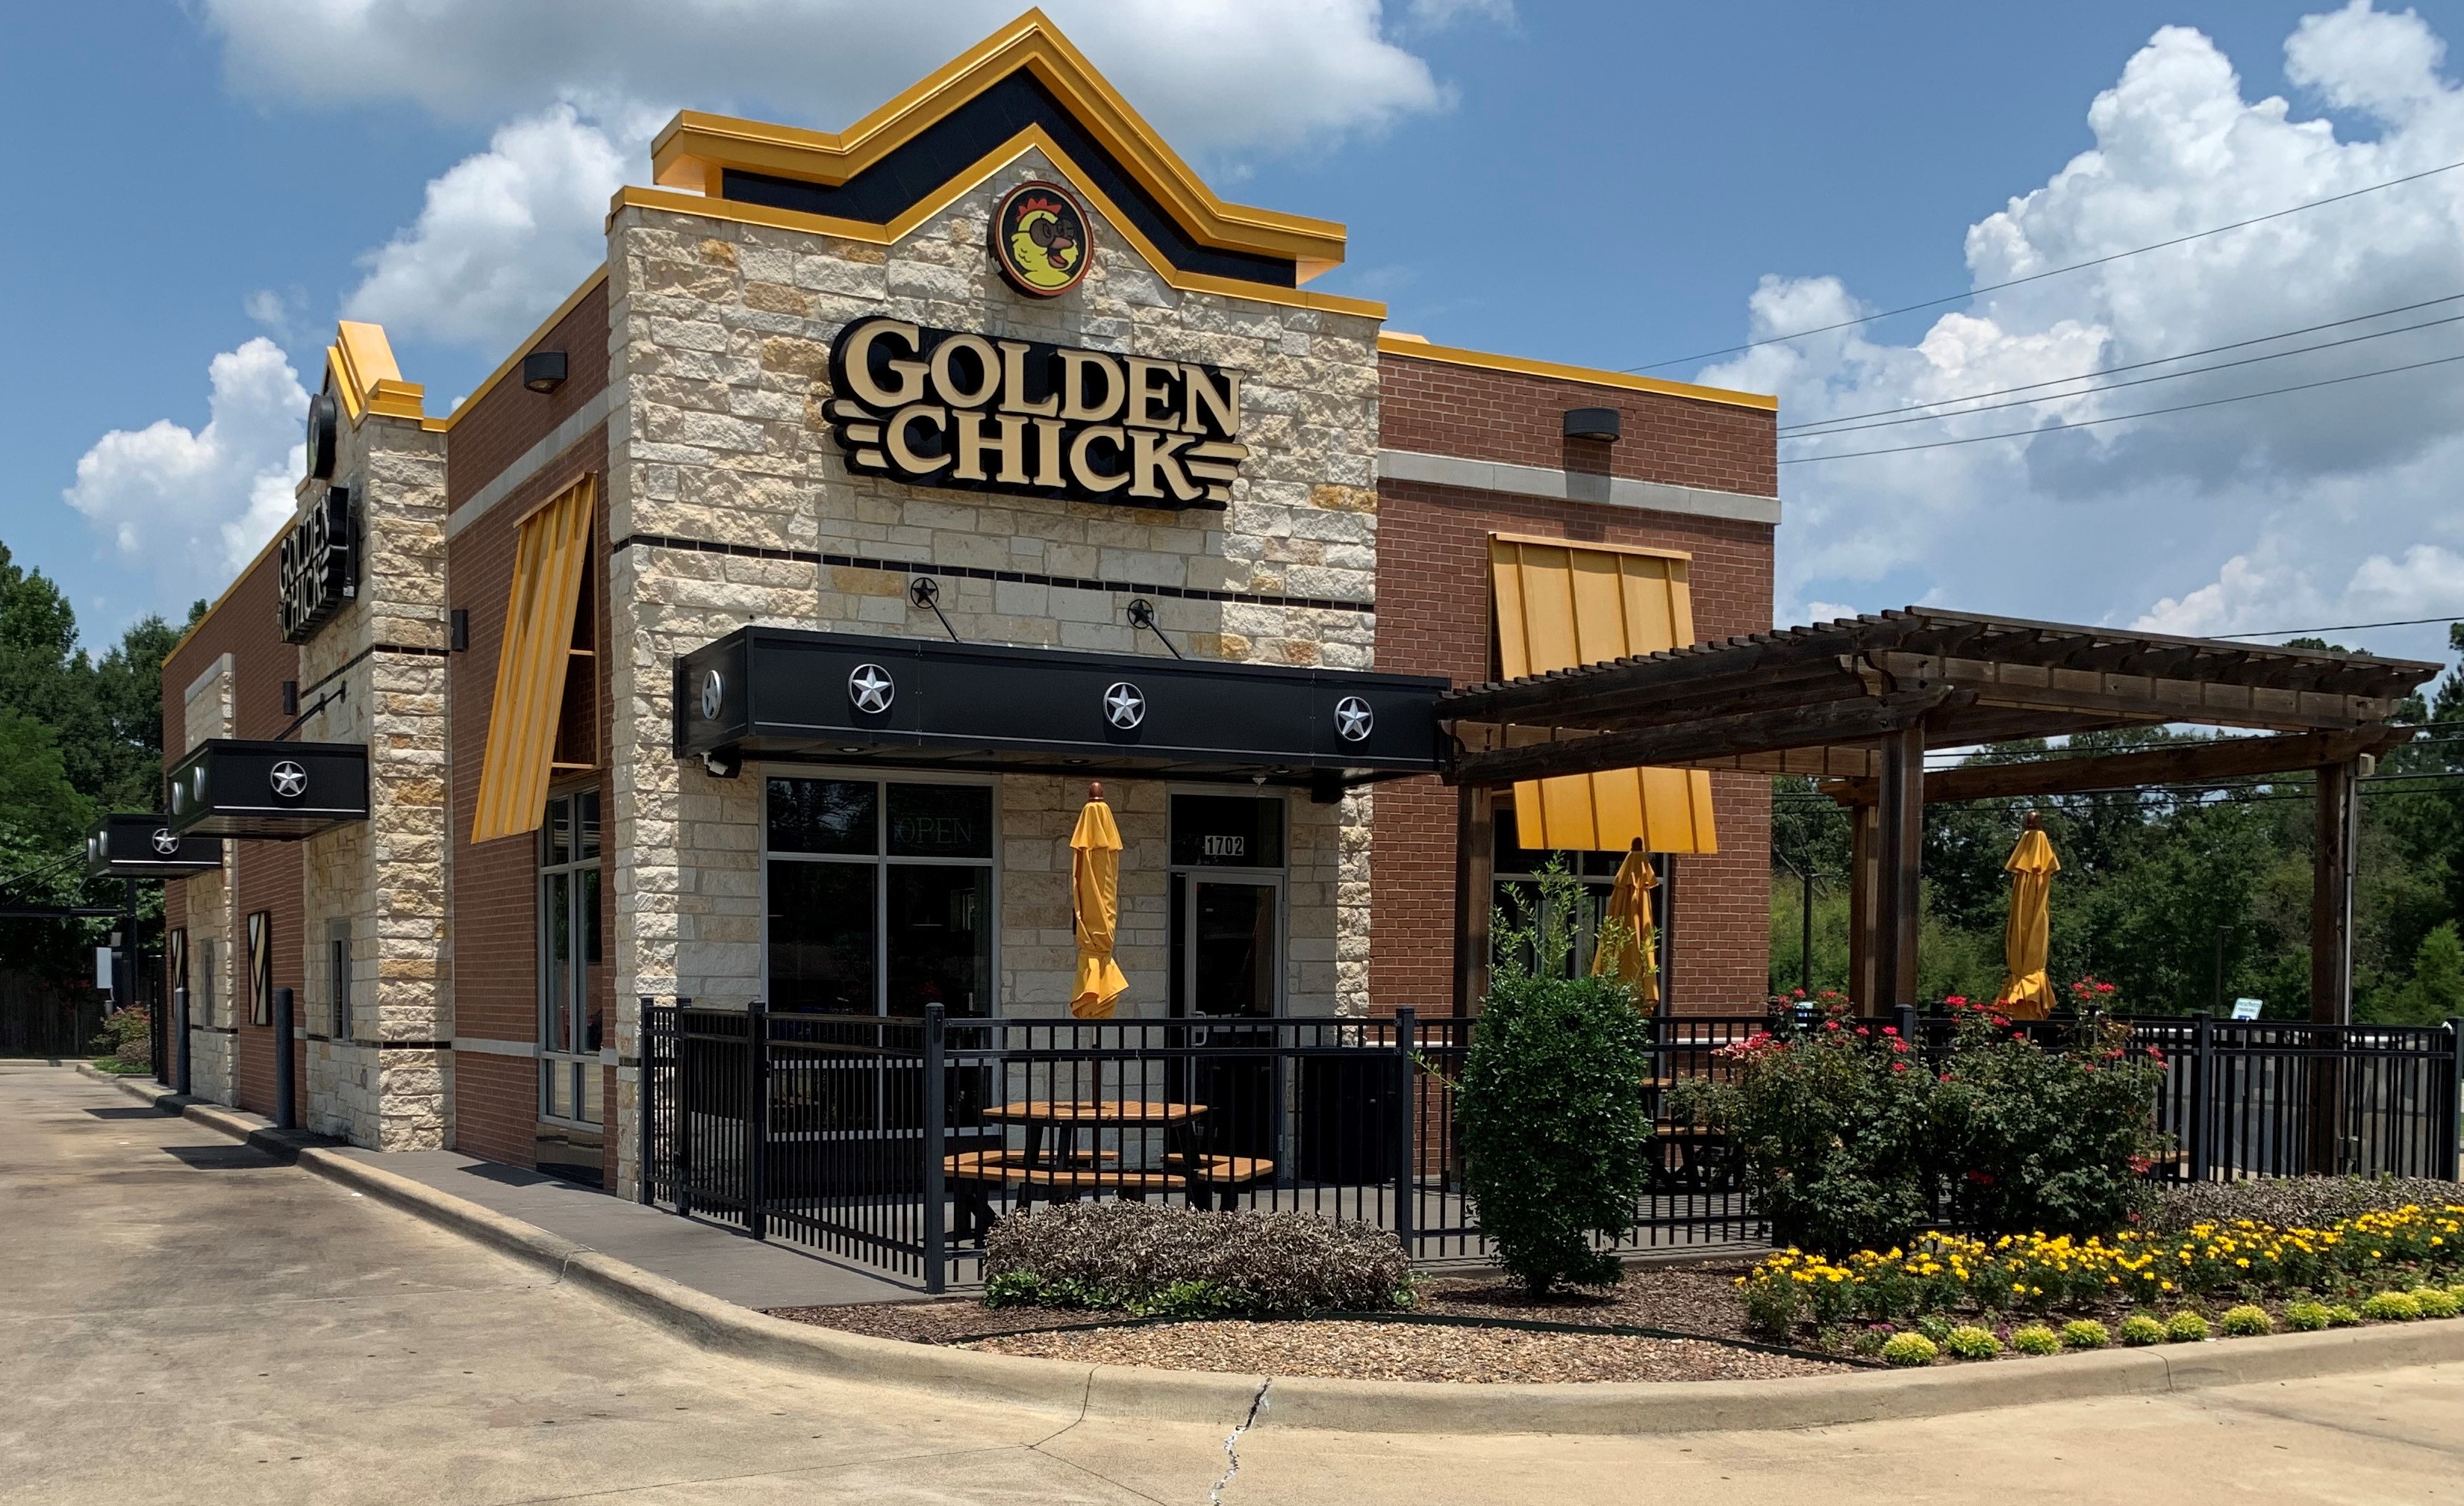 Golden Chick storefront.  Your local Golden Chick fast food restaurant in Marshall, Texas